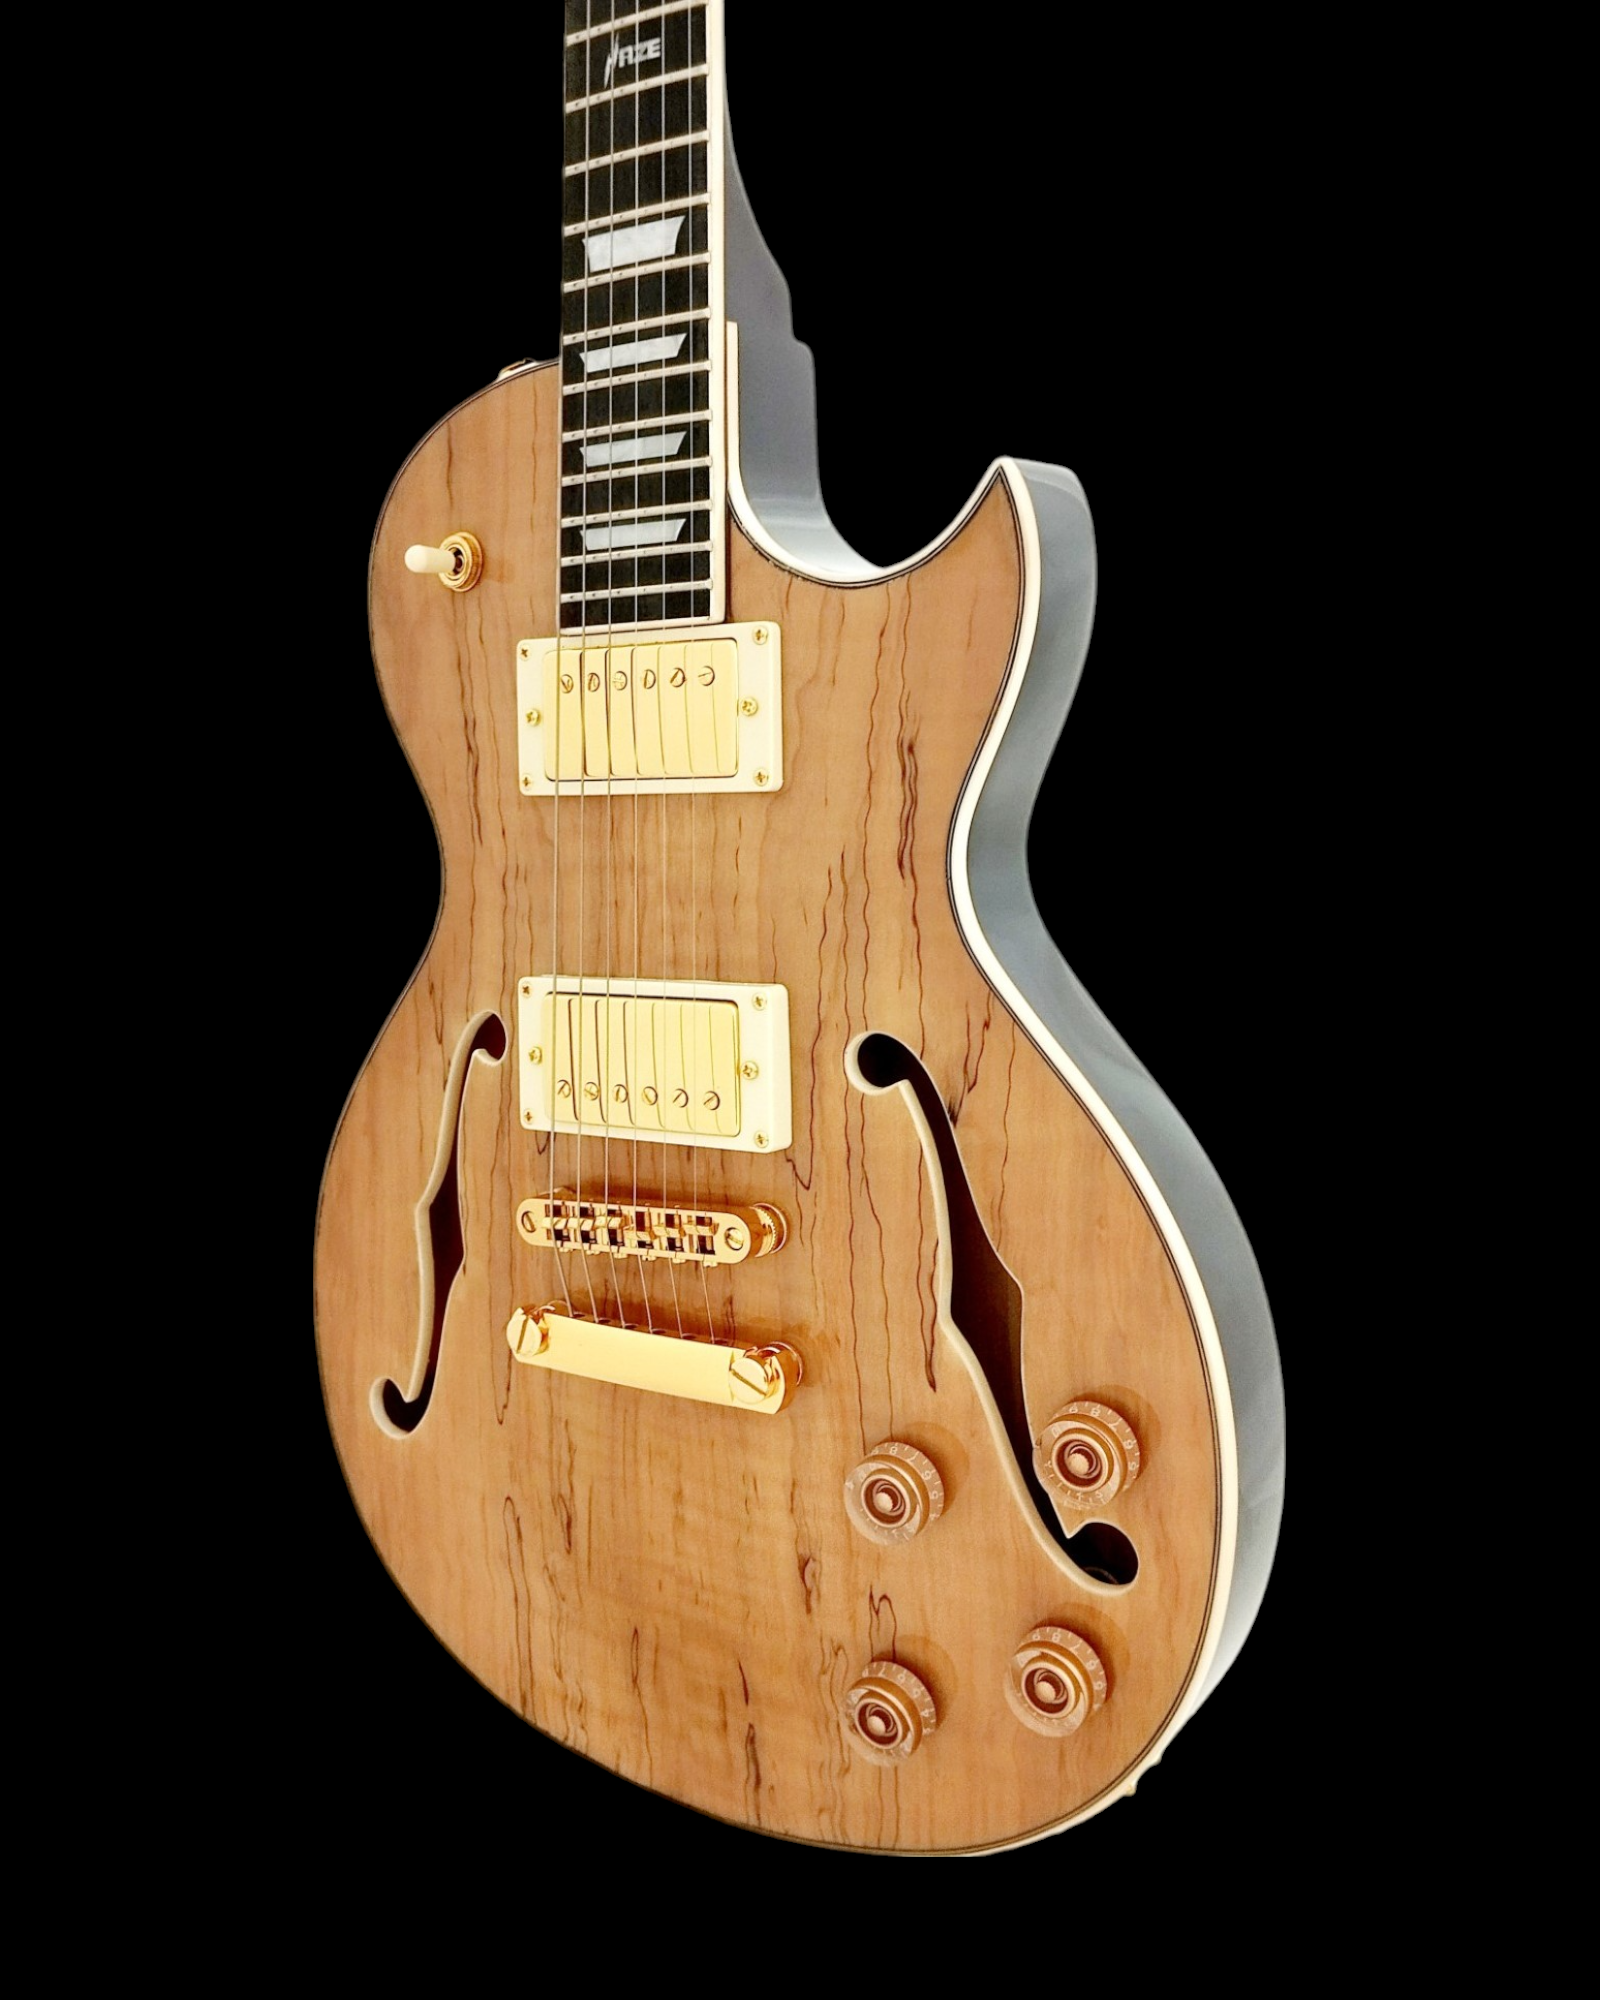 Haze Semi-Hollow Spalted Maple Mahogany Neck HLP Electric Guitar - Natural E239GC